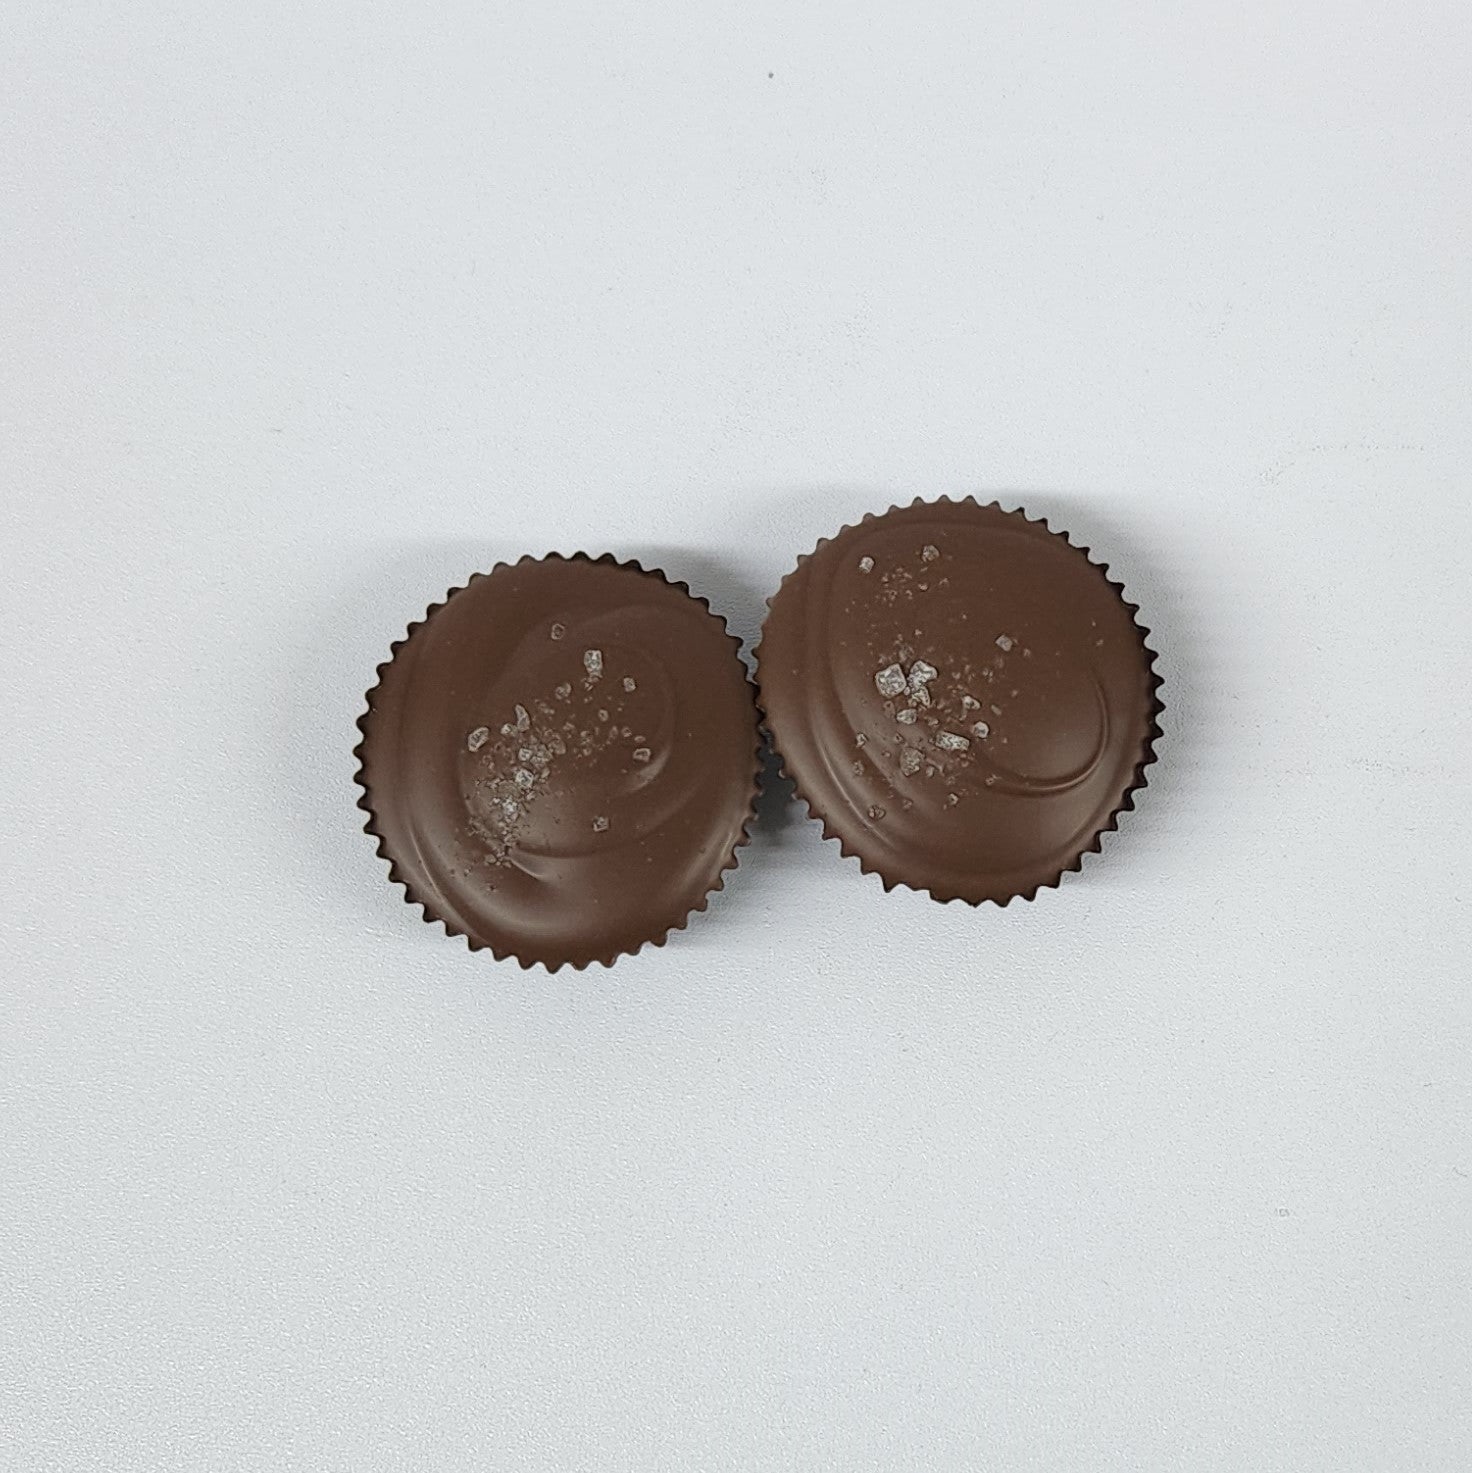 Milk Chocolate Sea Salt Caramel Cups made by Stage Stop Candy